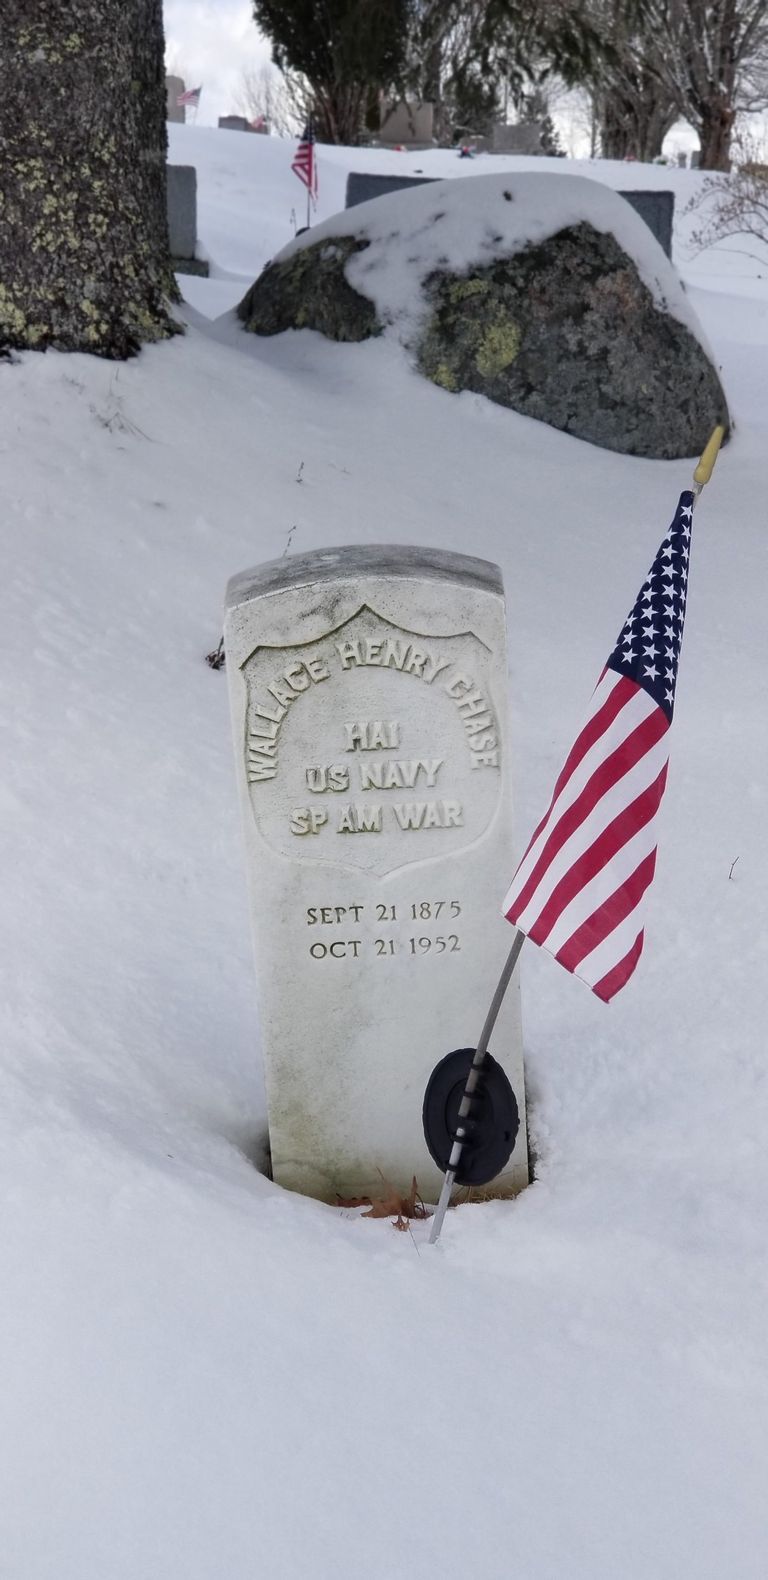          Wallace Henry Chase, Spanish American War Veteran, Dennysville, Maine; The inscription reads:  William Henry Chase, HAI, U.S. Navy, Spanish American War, Sept 21, 1875-Ocotber 21, 1952.
   